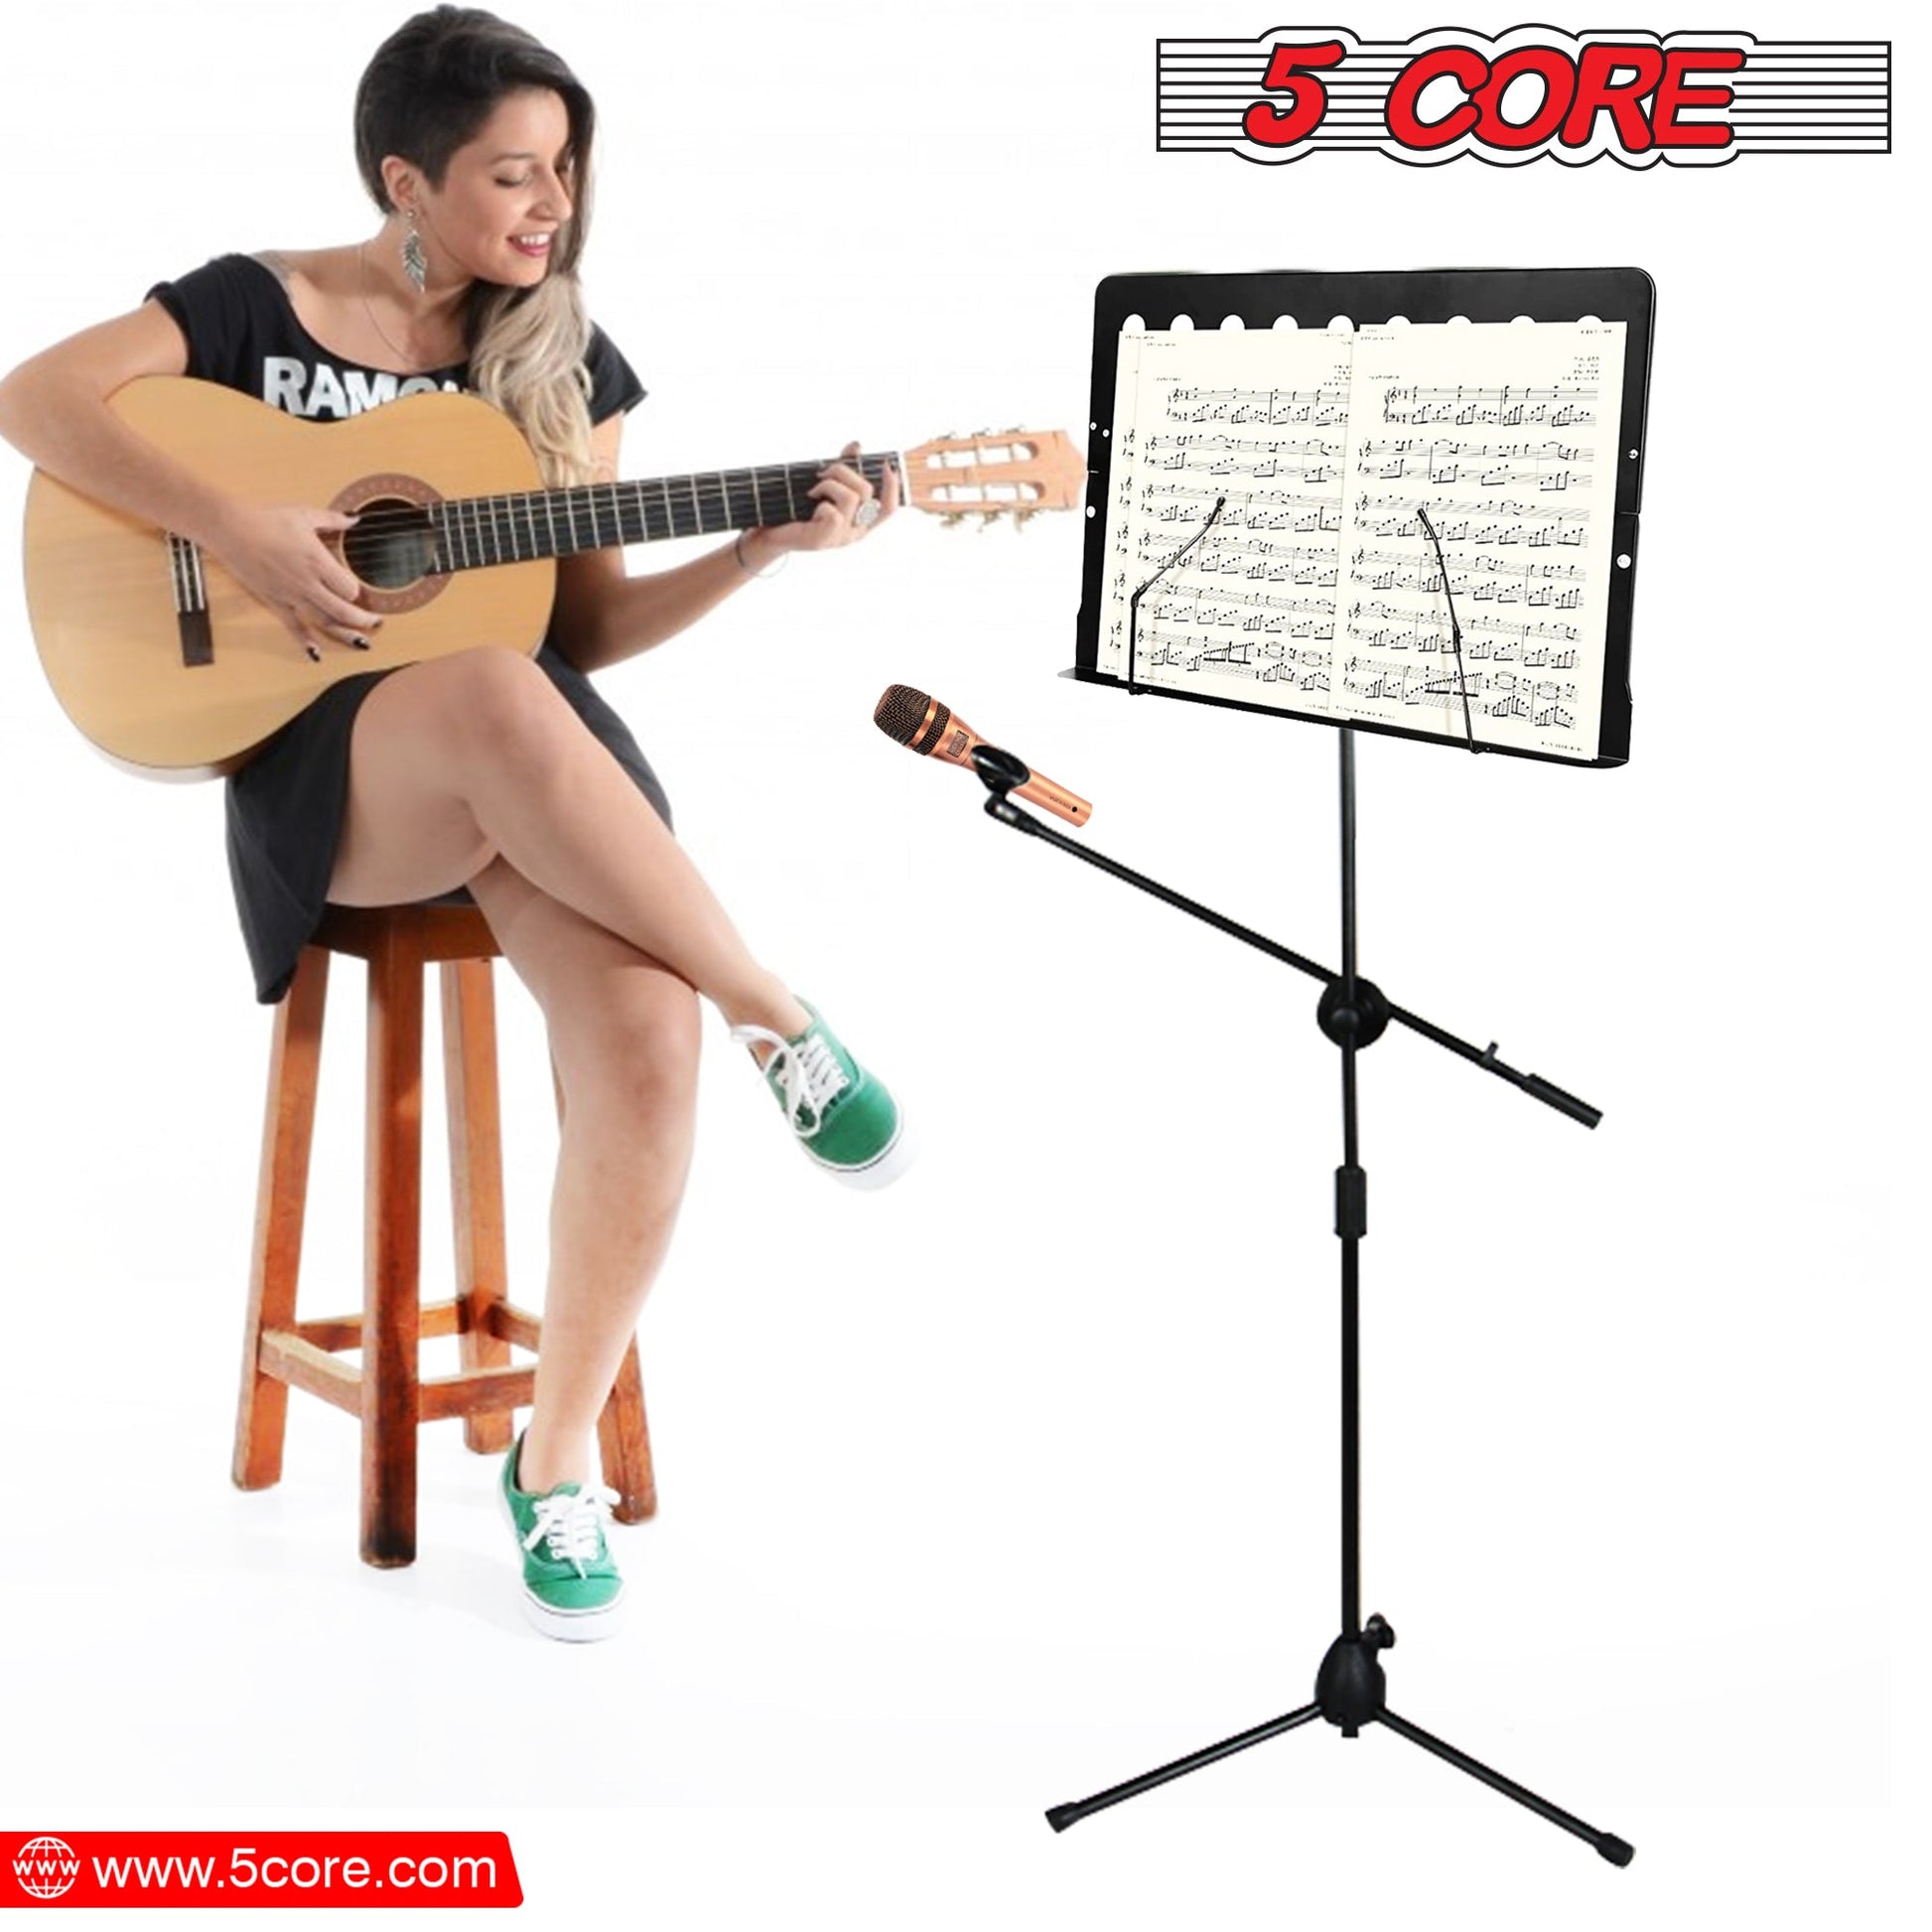 Ultimate Performance Combo: 5 Core Sheet Music Stand with Mic Stand Holder + Premium Vocal Dynamic Mic for Music and Karaoke Delights MUS MH+ND58BLK-12